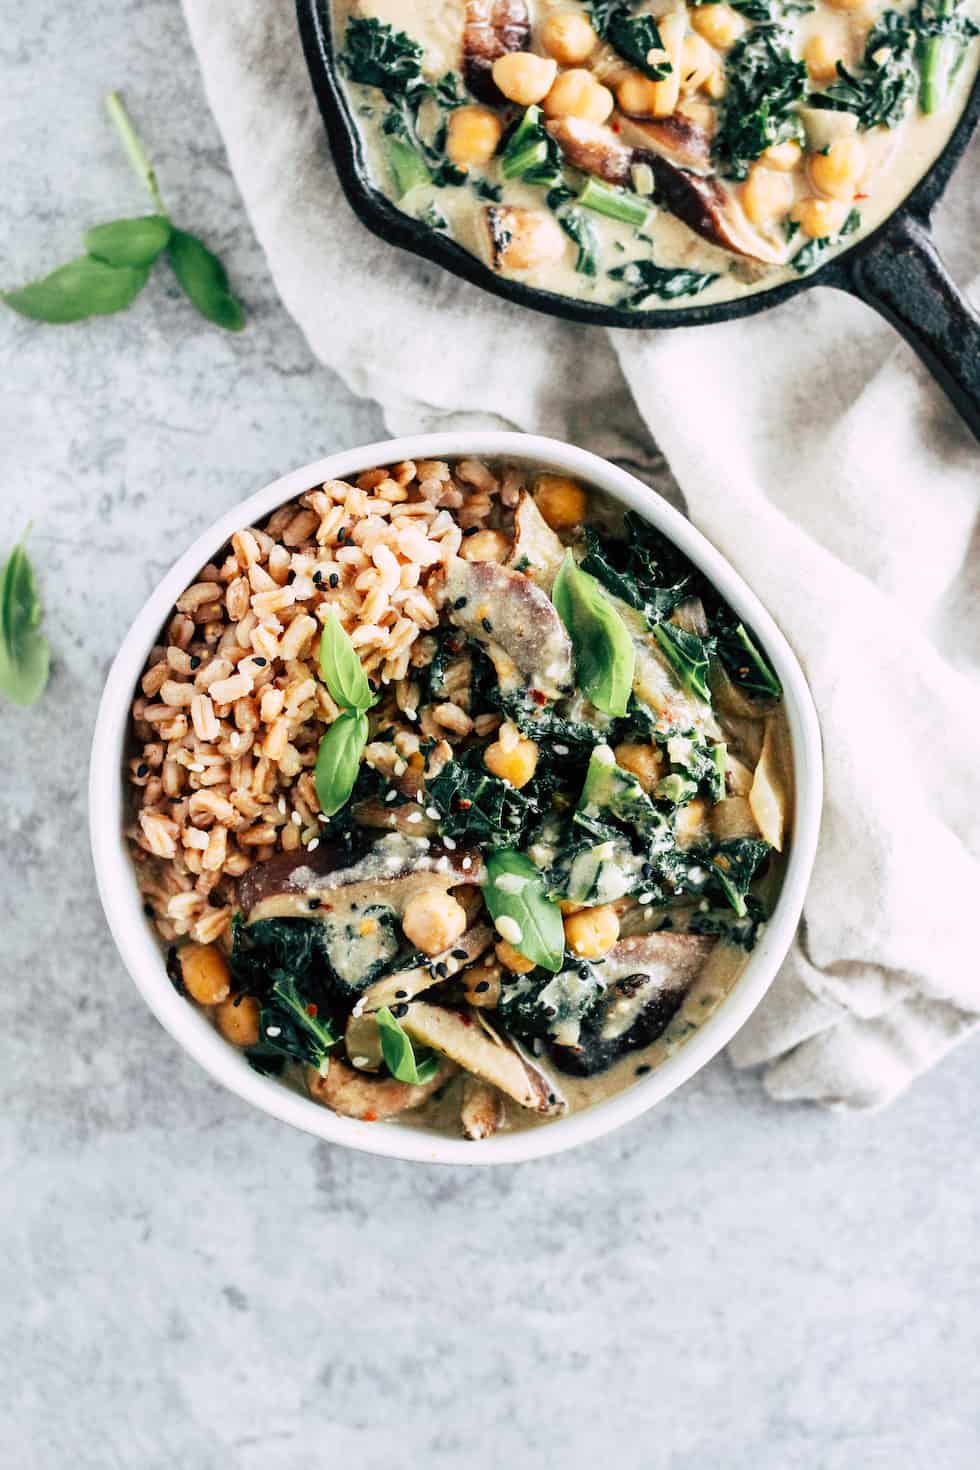 Creamy Vegan Miso Bowls with cast iron skillet and grey background.